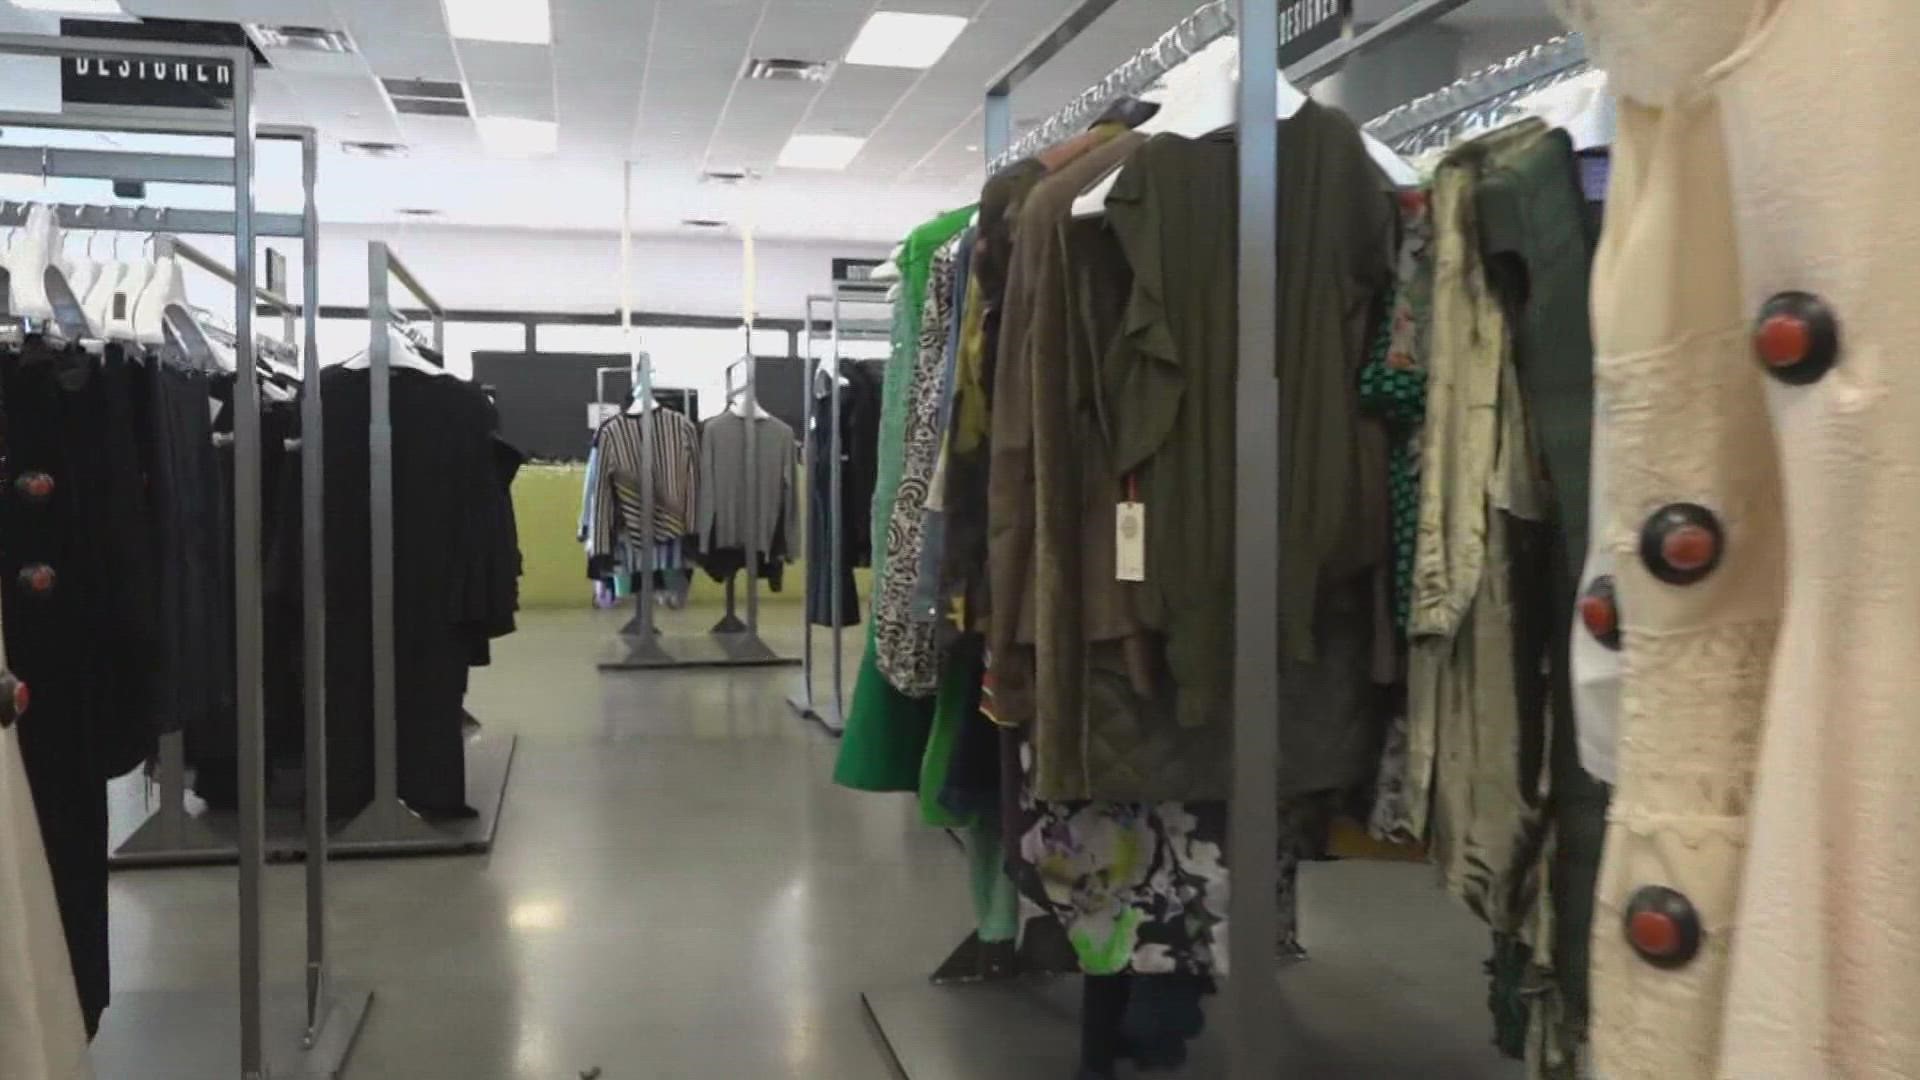 High cost items are going at low prices at Valley thrift stores, helping them stay afloat in difficult economic times.